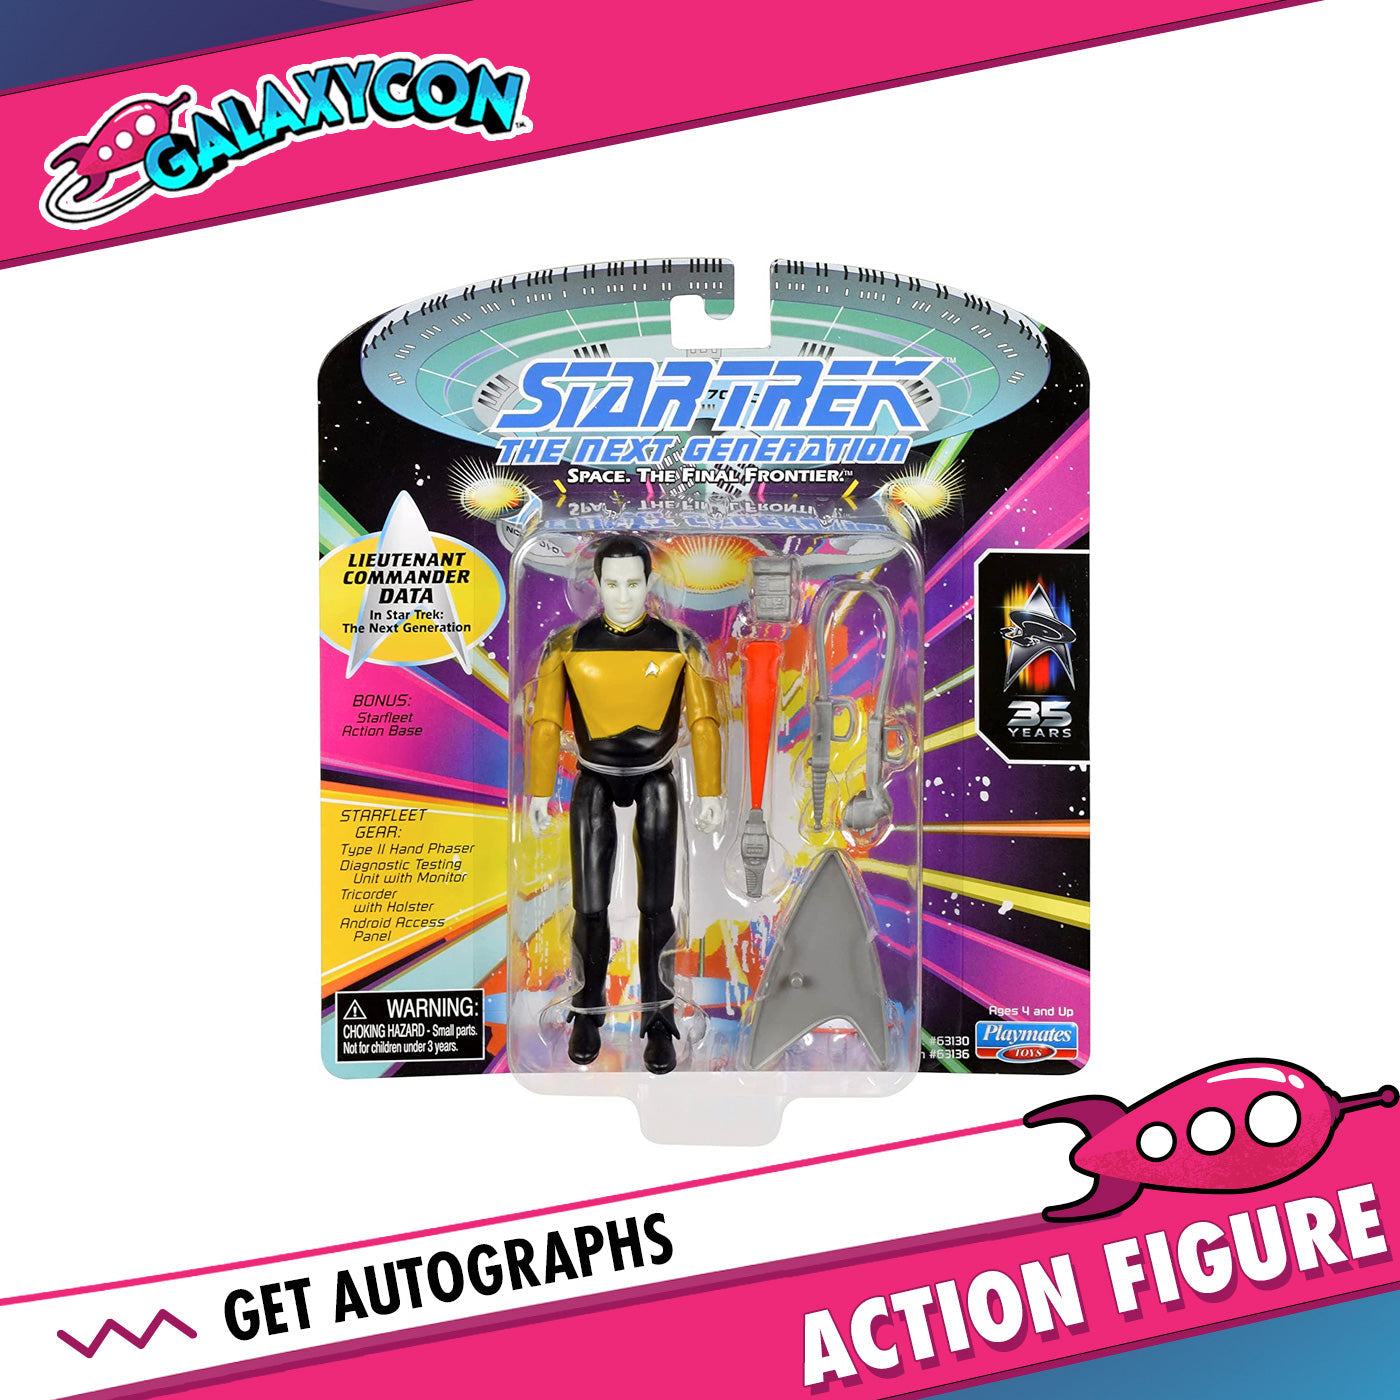 Brent Spiner: Autograph Signing on an Action Figure, November 5th